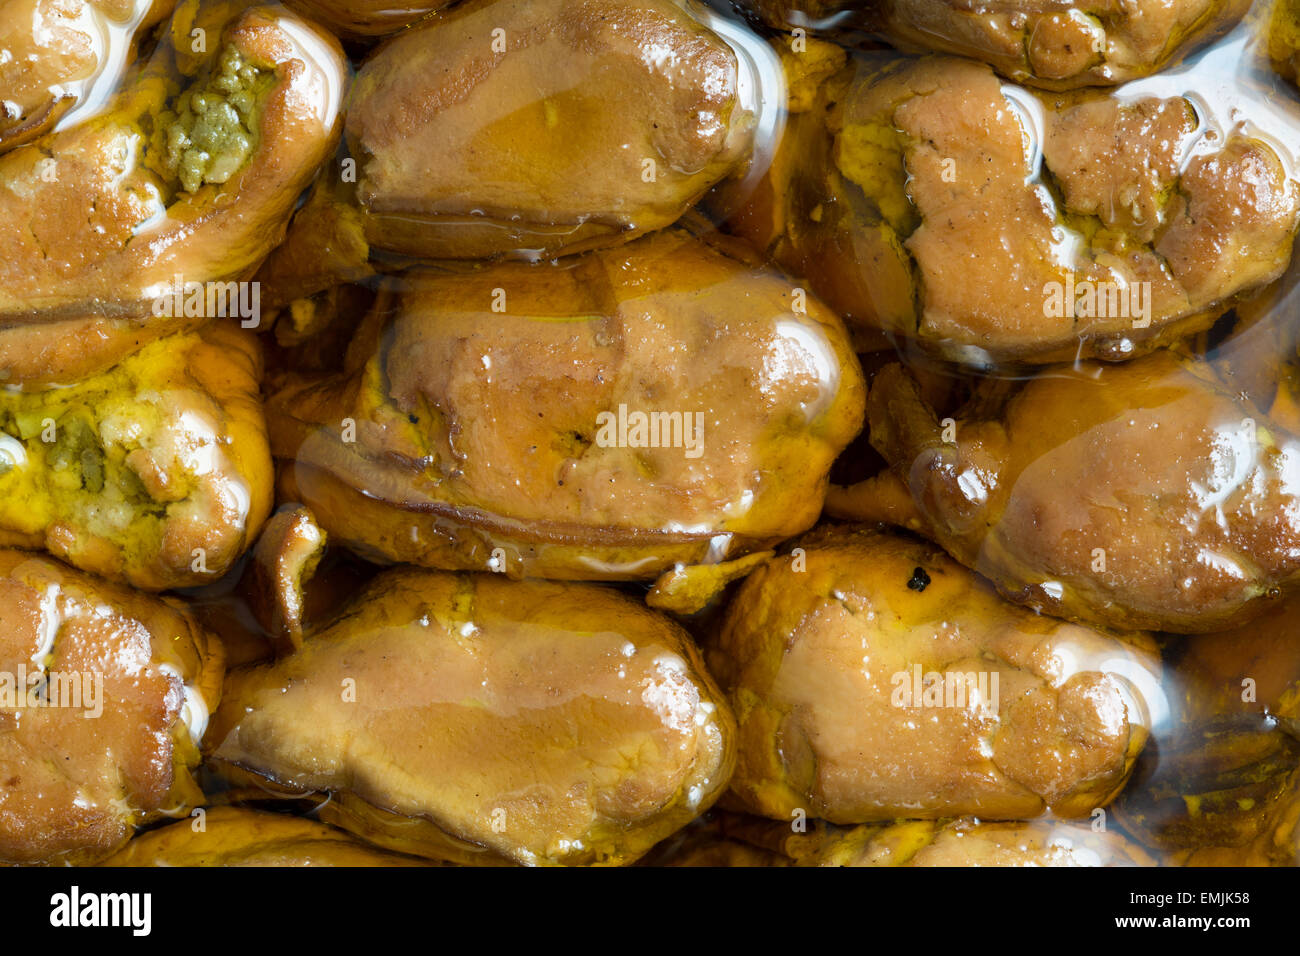 A very close view of smoked whole oysters in cottonseed oil. Stock Photo